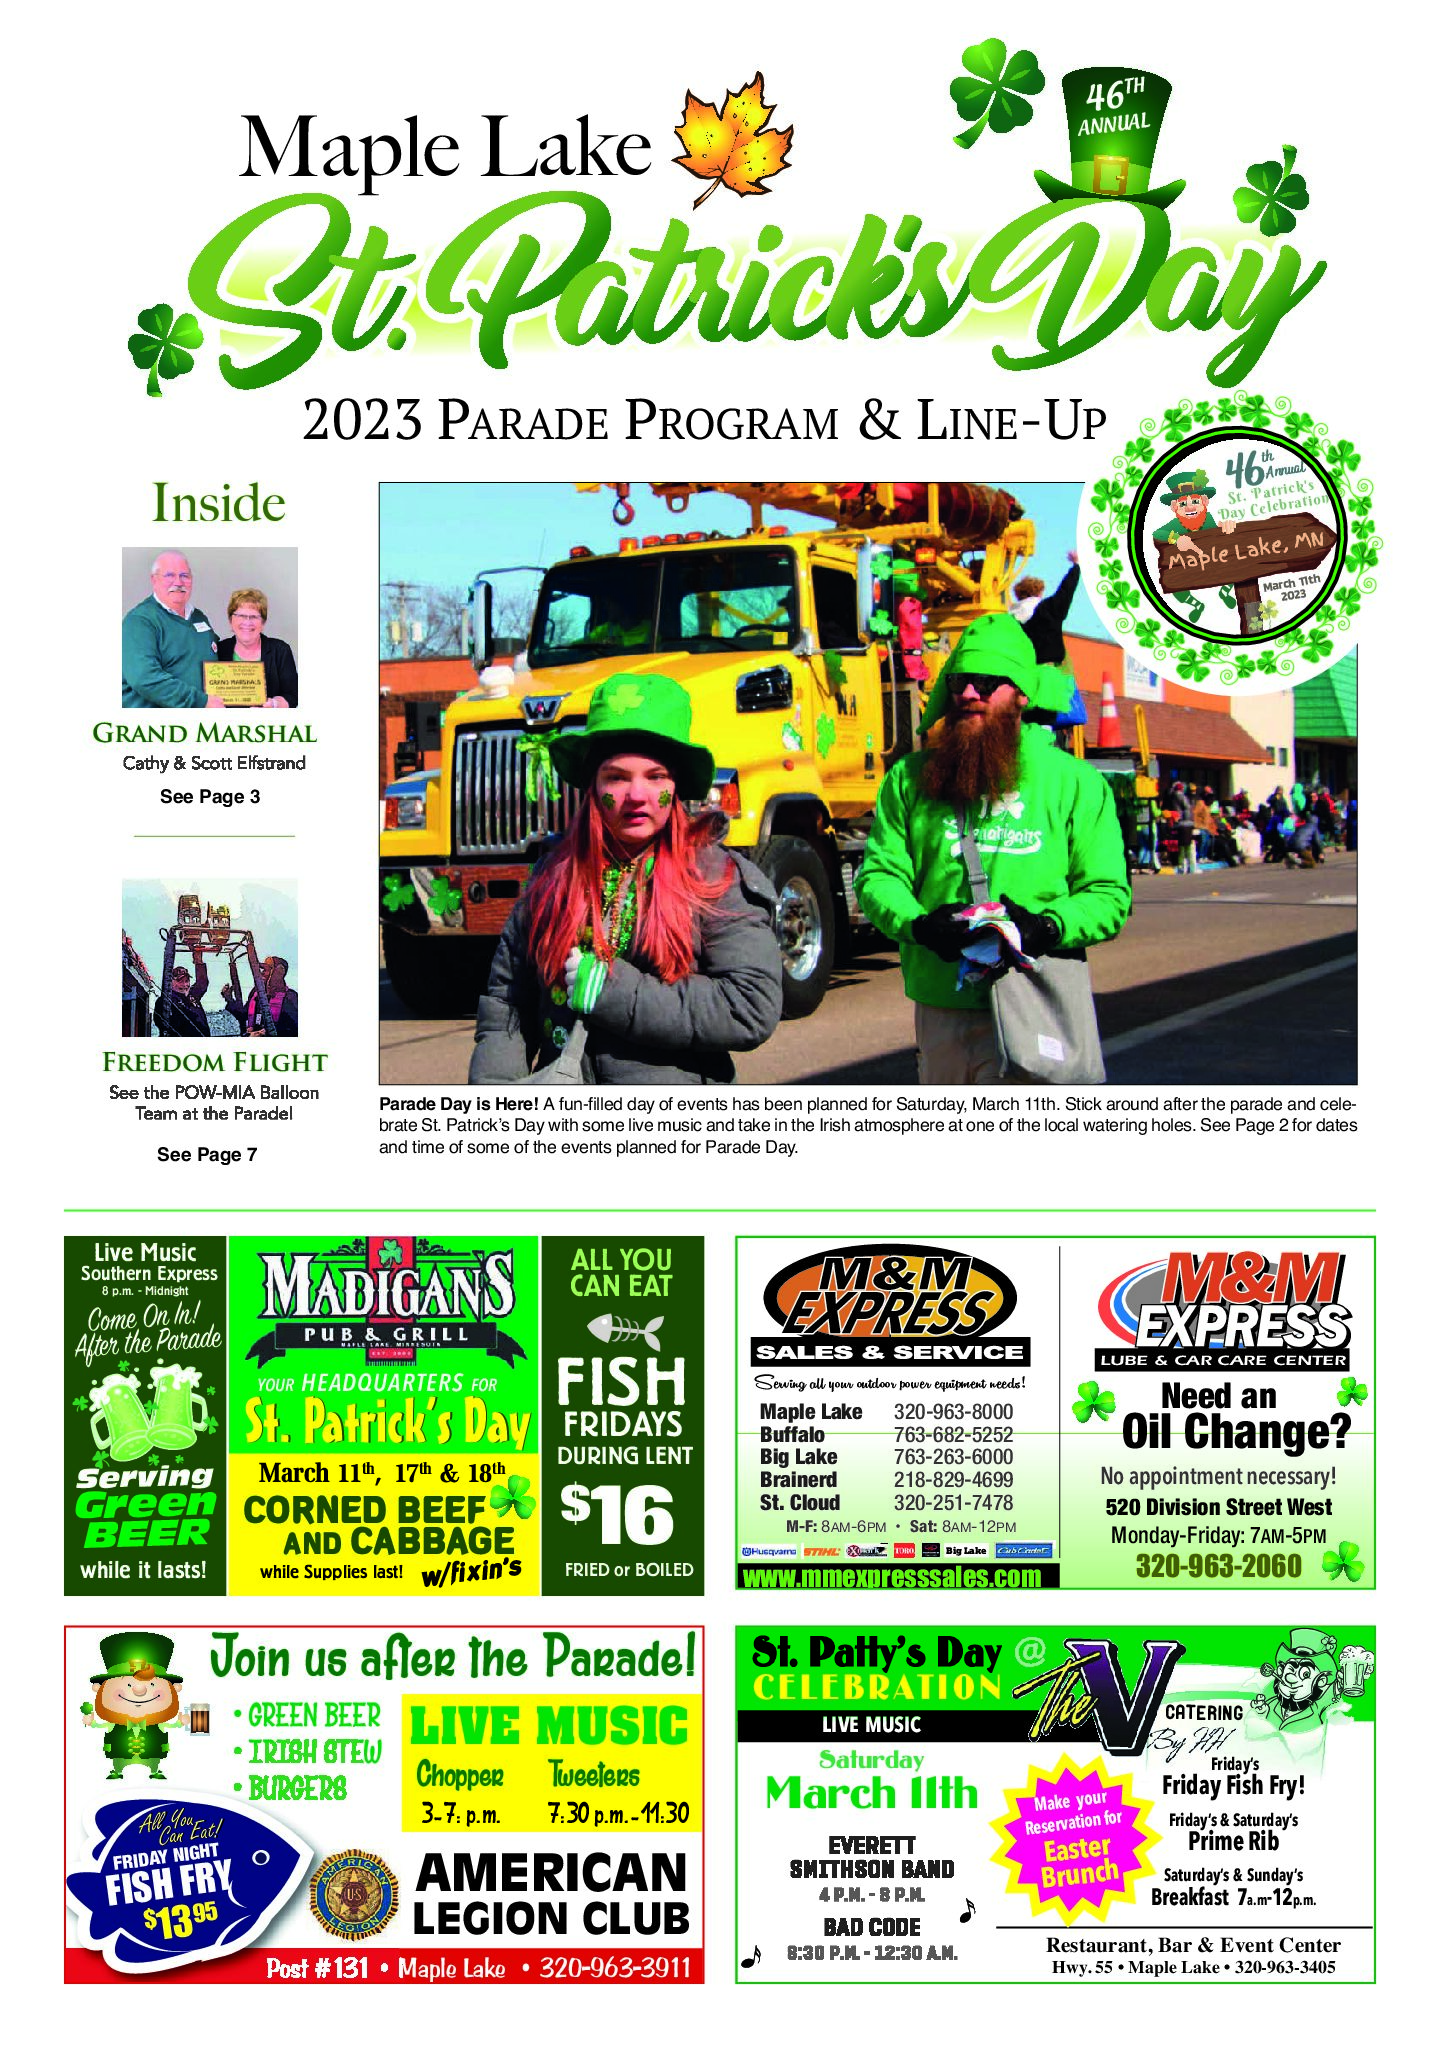 46th Annual St. Patrick’s Day Parade-This year’s Parade Program | Maple ...